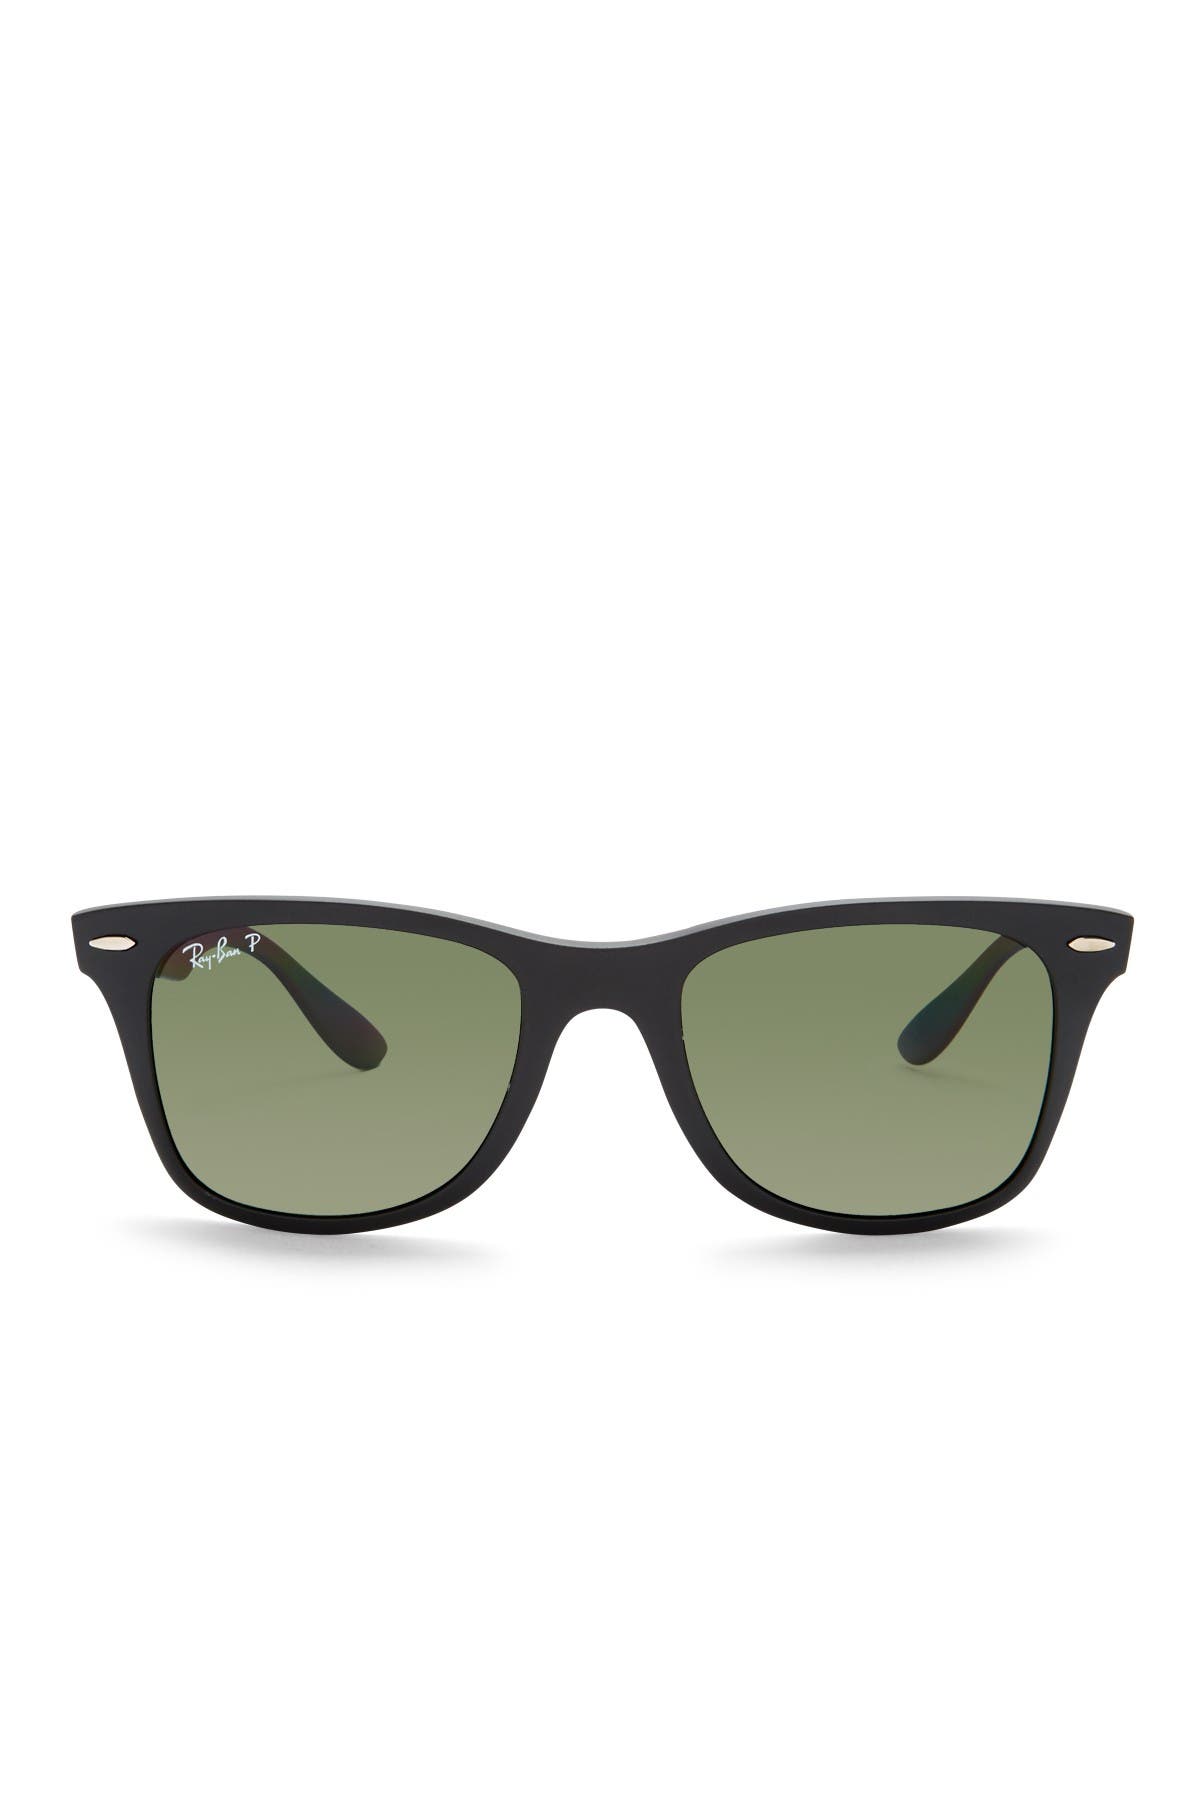 nordstrom rack ray ban sale